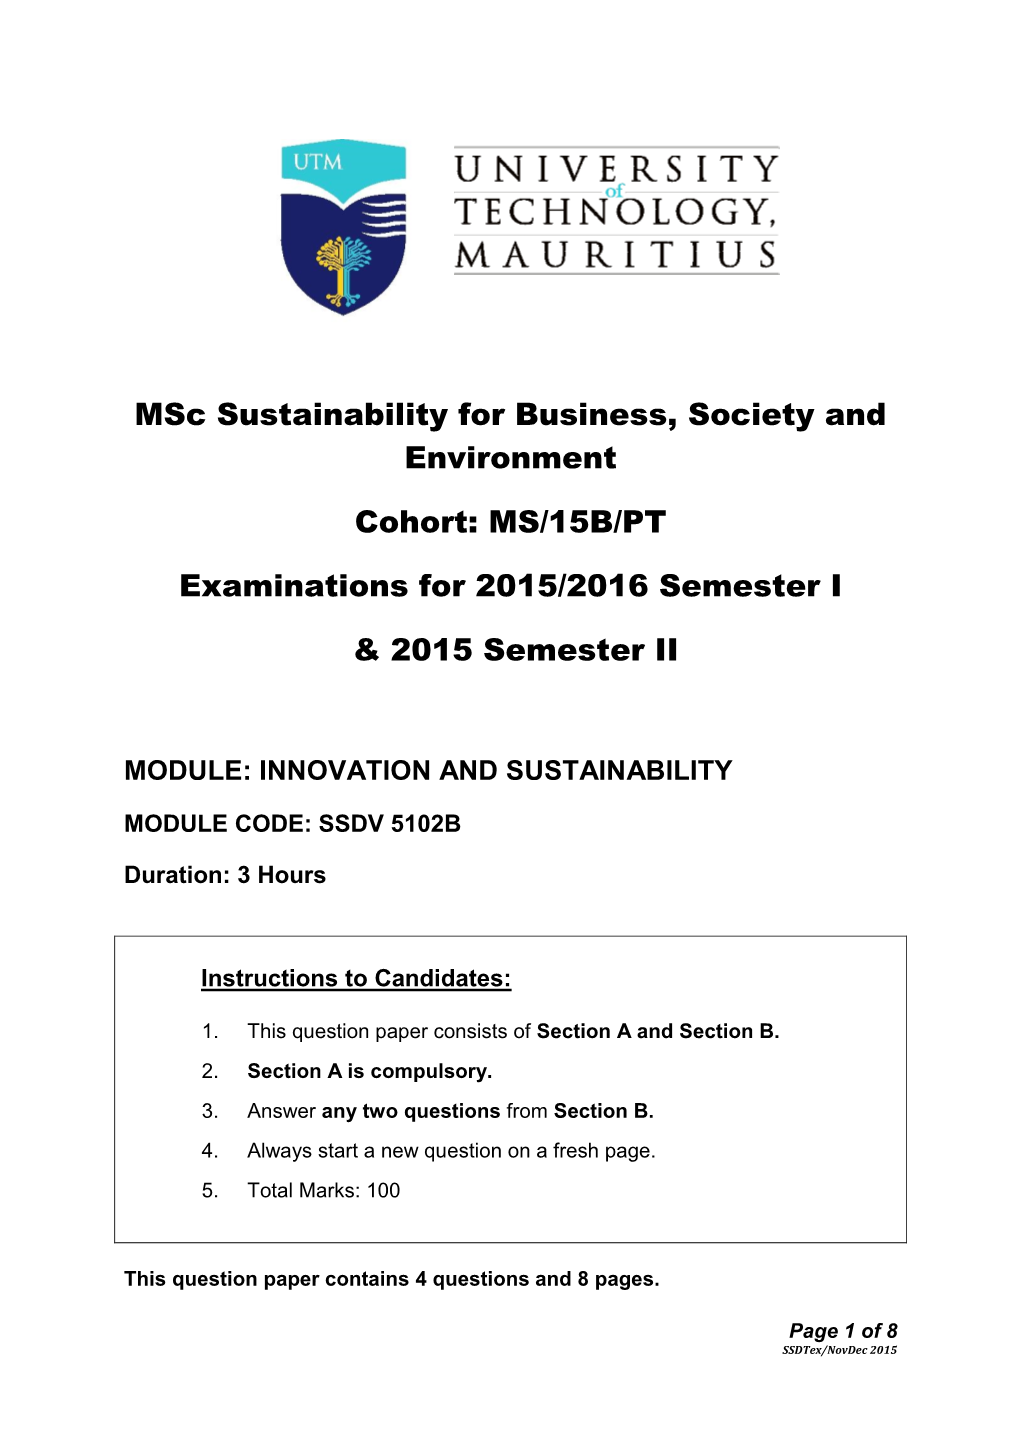 Msc Sustainability for Business, Society and Environment Cohort: MS/15B/PT Examinations for 2015/2016 Semester I & 2015 Seme